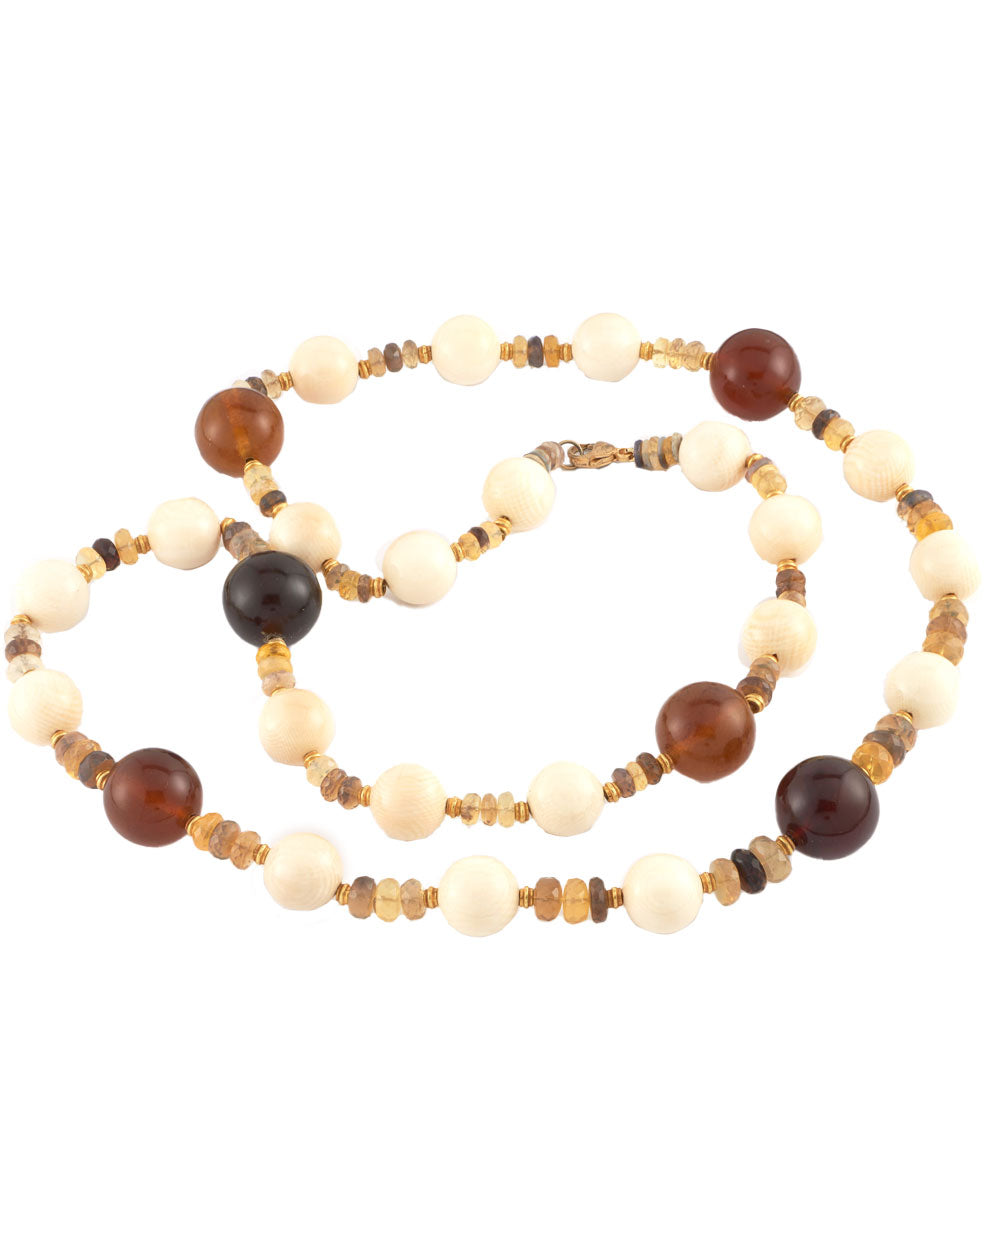 Opal and Amber Bead Necklace